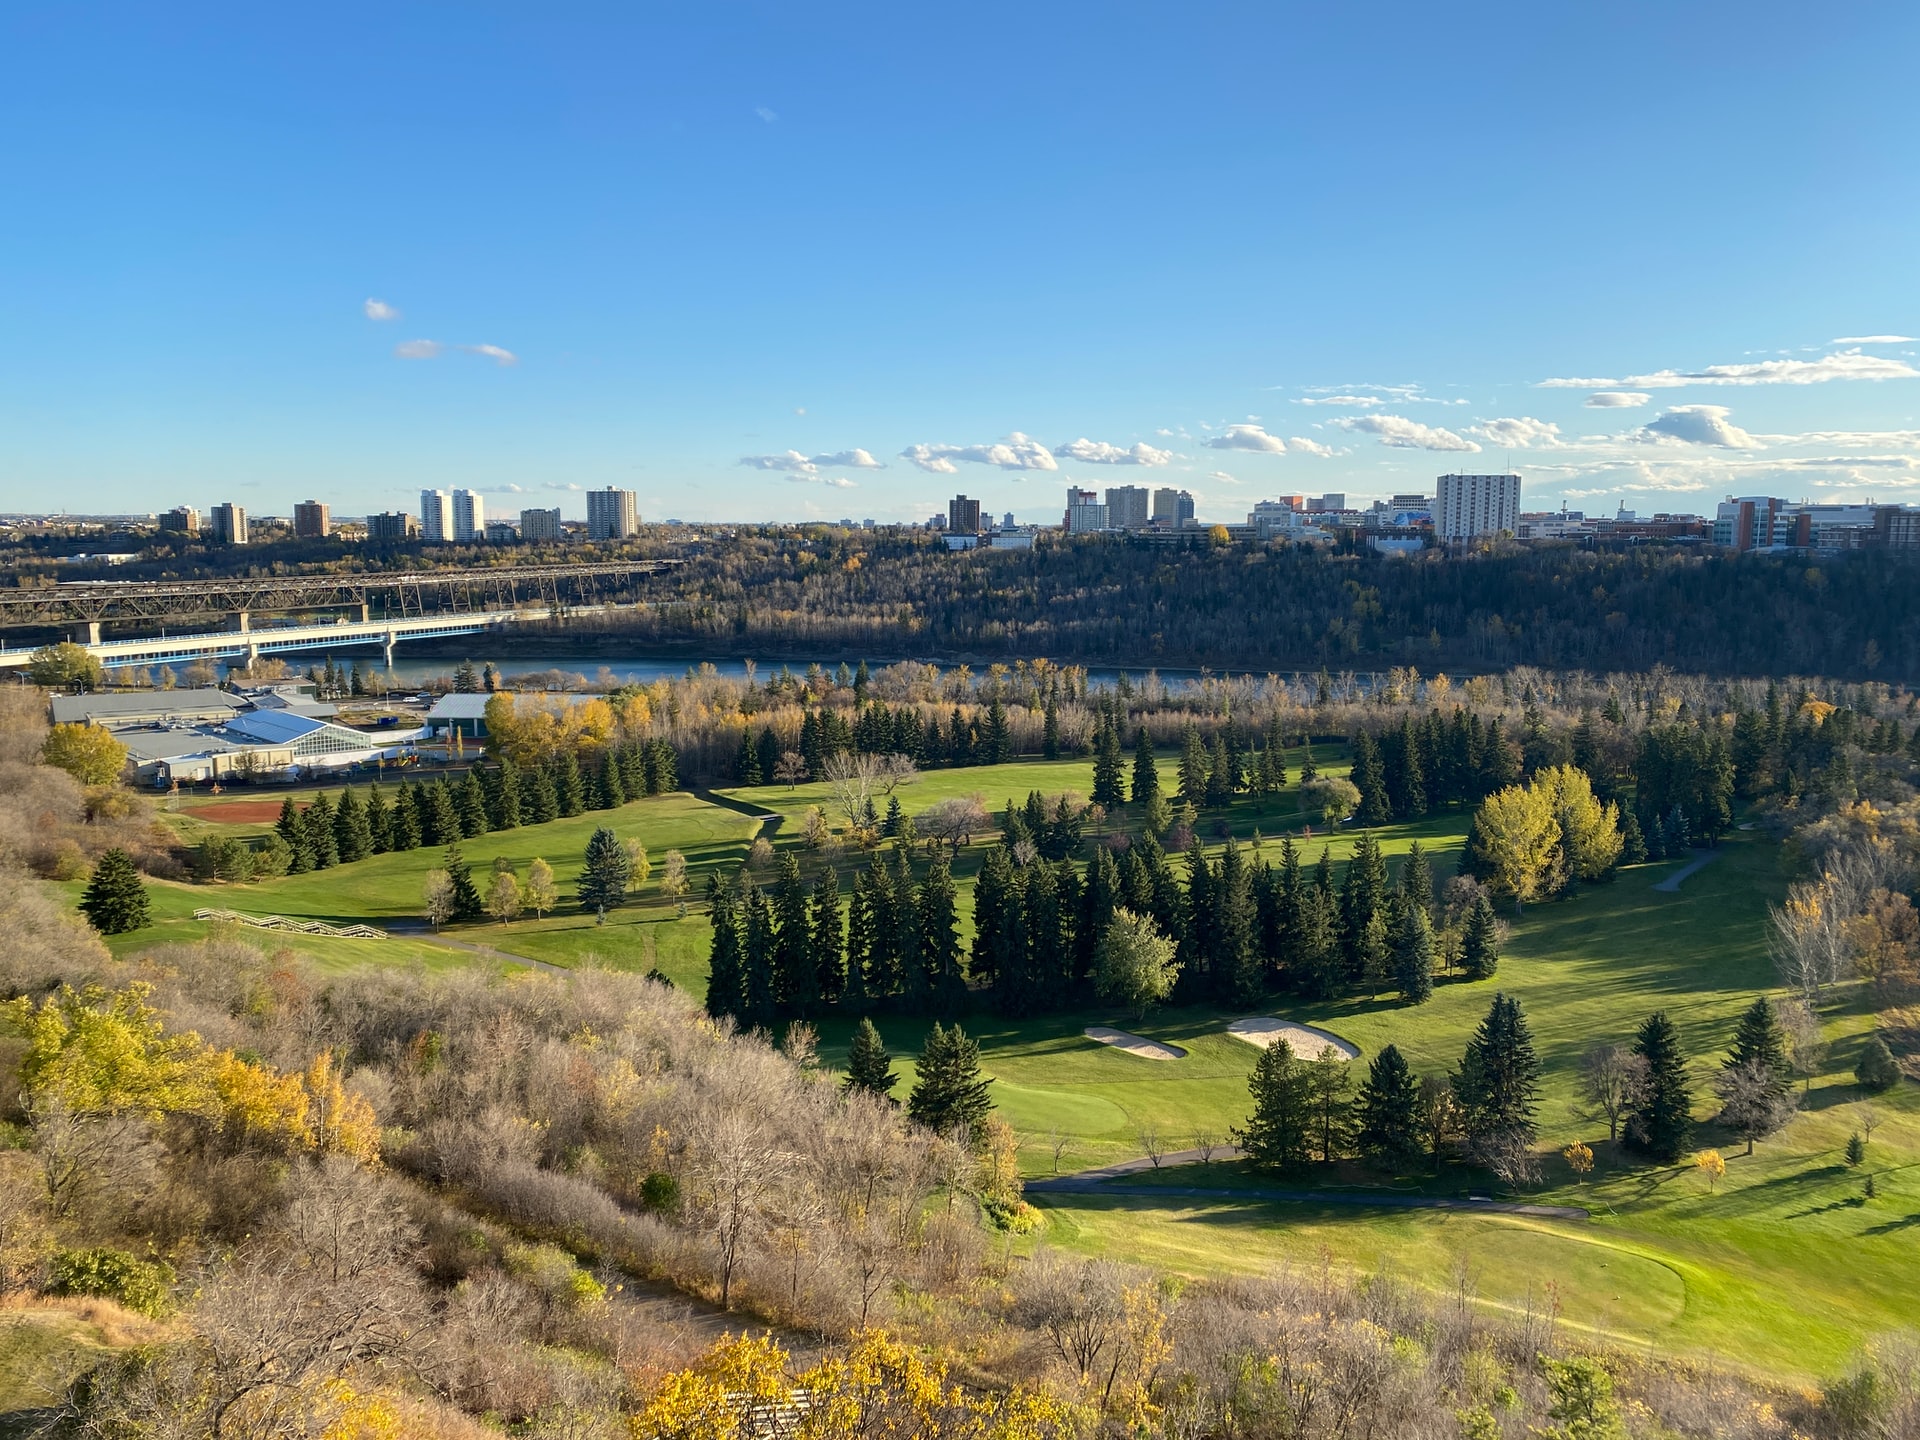 The Power of Perception: Focusing on the Best Things About Edmonton